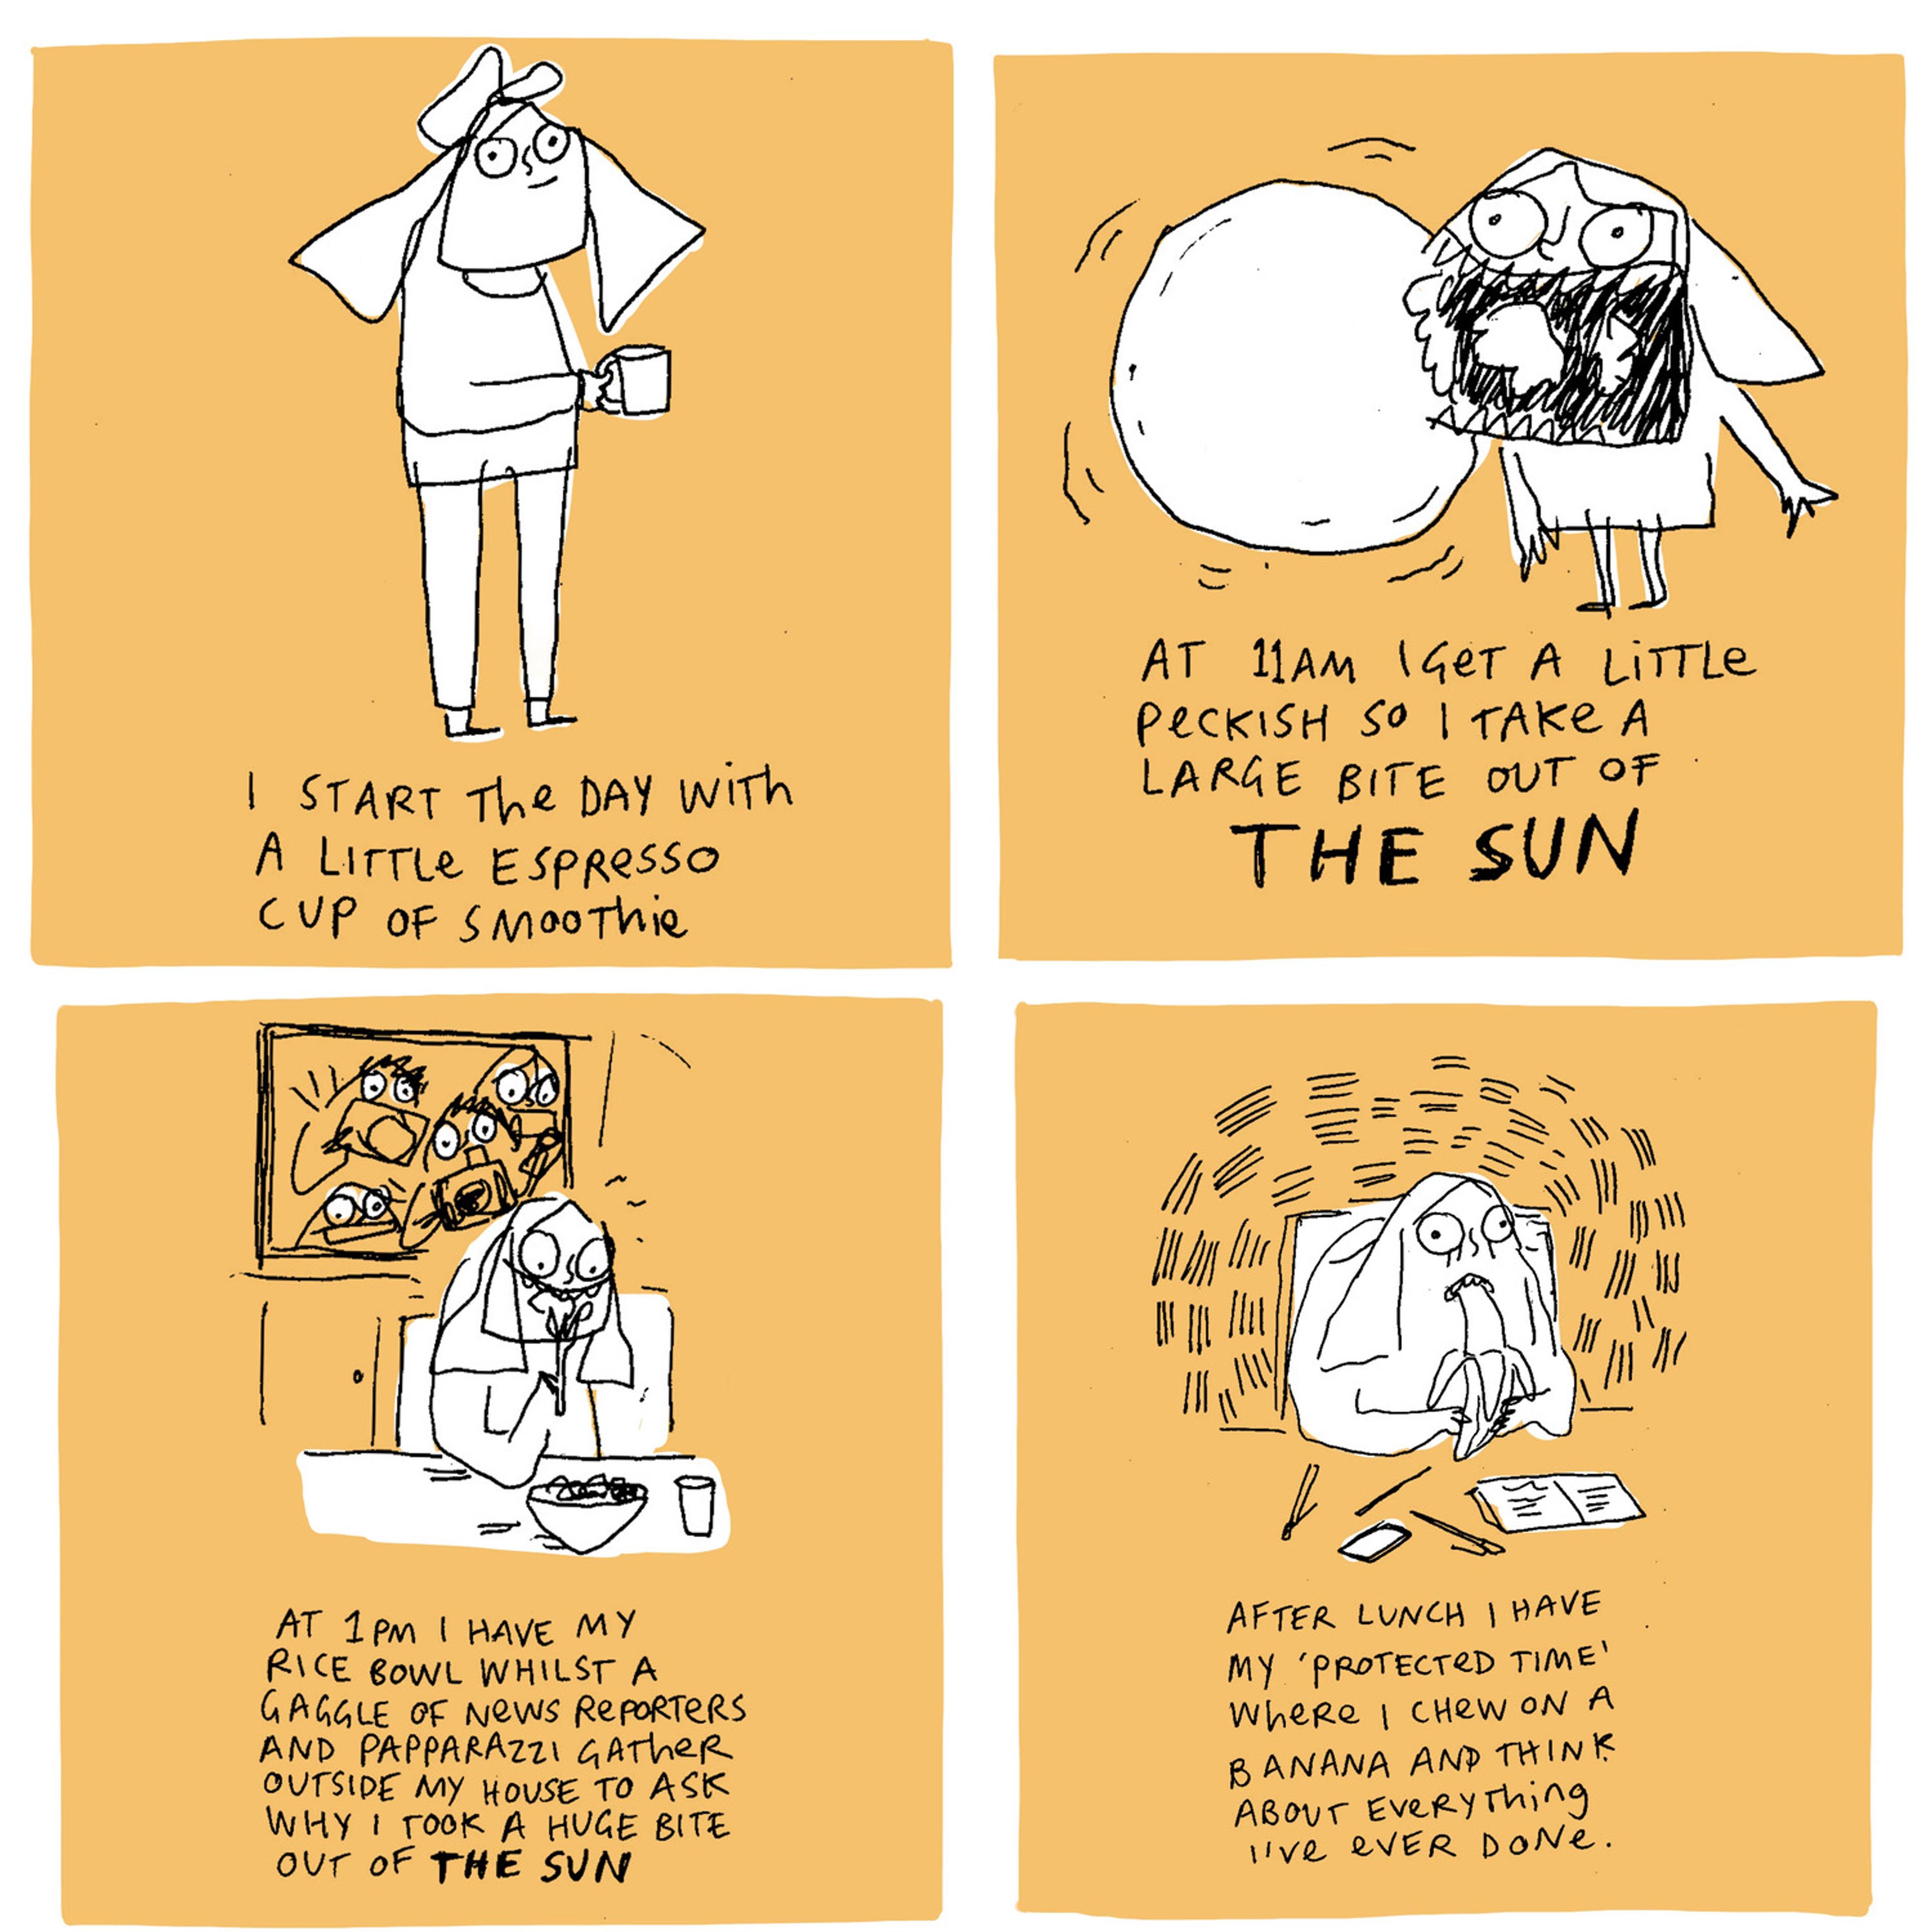 Four drawings in four squares each on a peach background.  Top left square has a drawing of a person with a cup in their hand with the text 'I start the day with a little espresso cup of smootie'.  Top right square has a drawing of a person with a exaggerated open mouth, next to a round organic shape with the text 'At 11am I get a little peckish so i take a large bite out of THE SUN'. Bottom left square has a drawing of a person sitting eating from a bowl of food in front of a window which is full of people holding cameras with the text 'At 1pm I have my rice bowl whilst a gaggle of news reporters and papparazzi gather outside my house to ask why i took a huge bite out of THE SUN'. Bottom right square has a drawing of a person looking worried, while eating a banana, sitting at a desk with notebooks, pens and a phone on the table with the text 'After lunch I have my 'protected time' where i chew on a banana and think about everything i've ever done.'. 